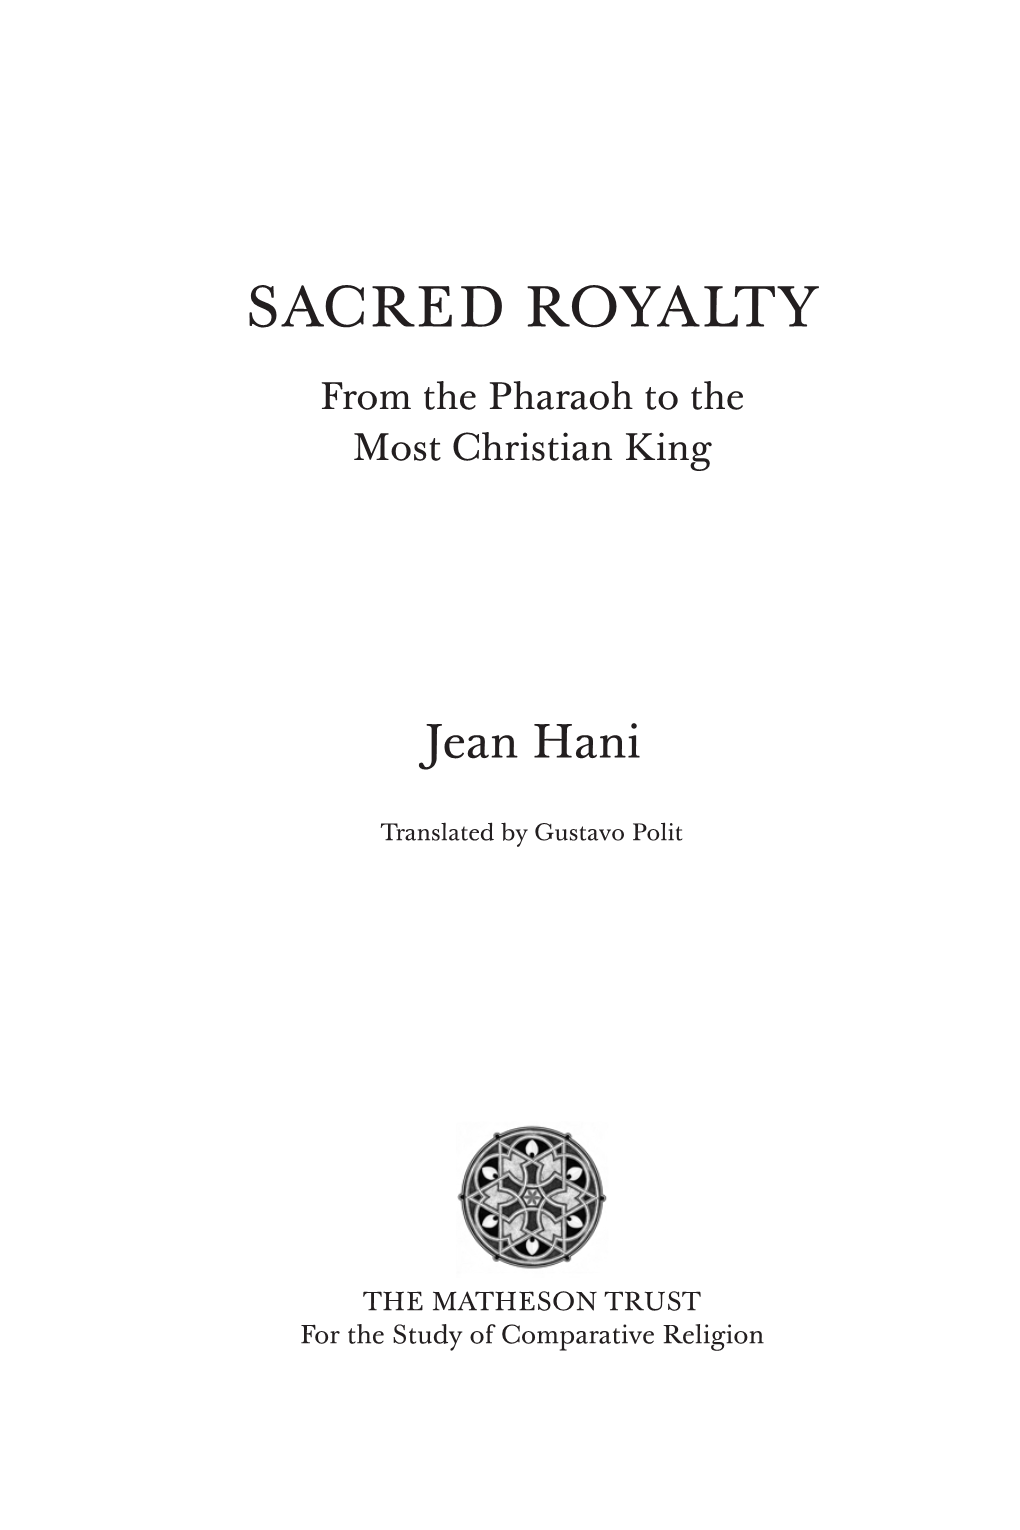 SACRED ROYALTY from the Pharaoh to the Most Christian King